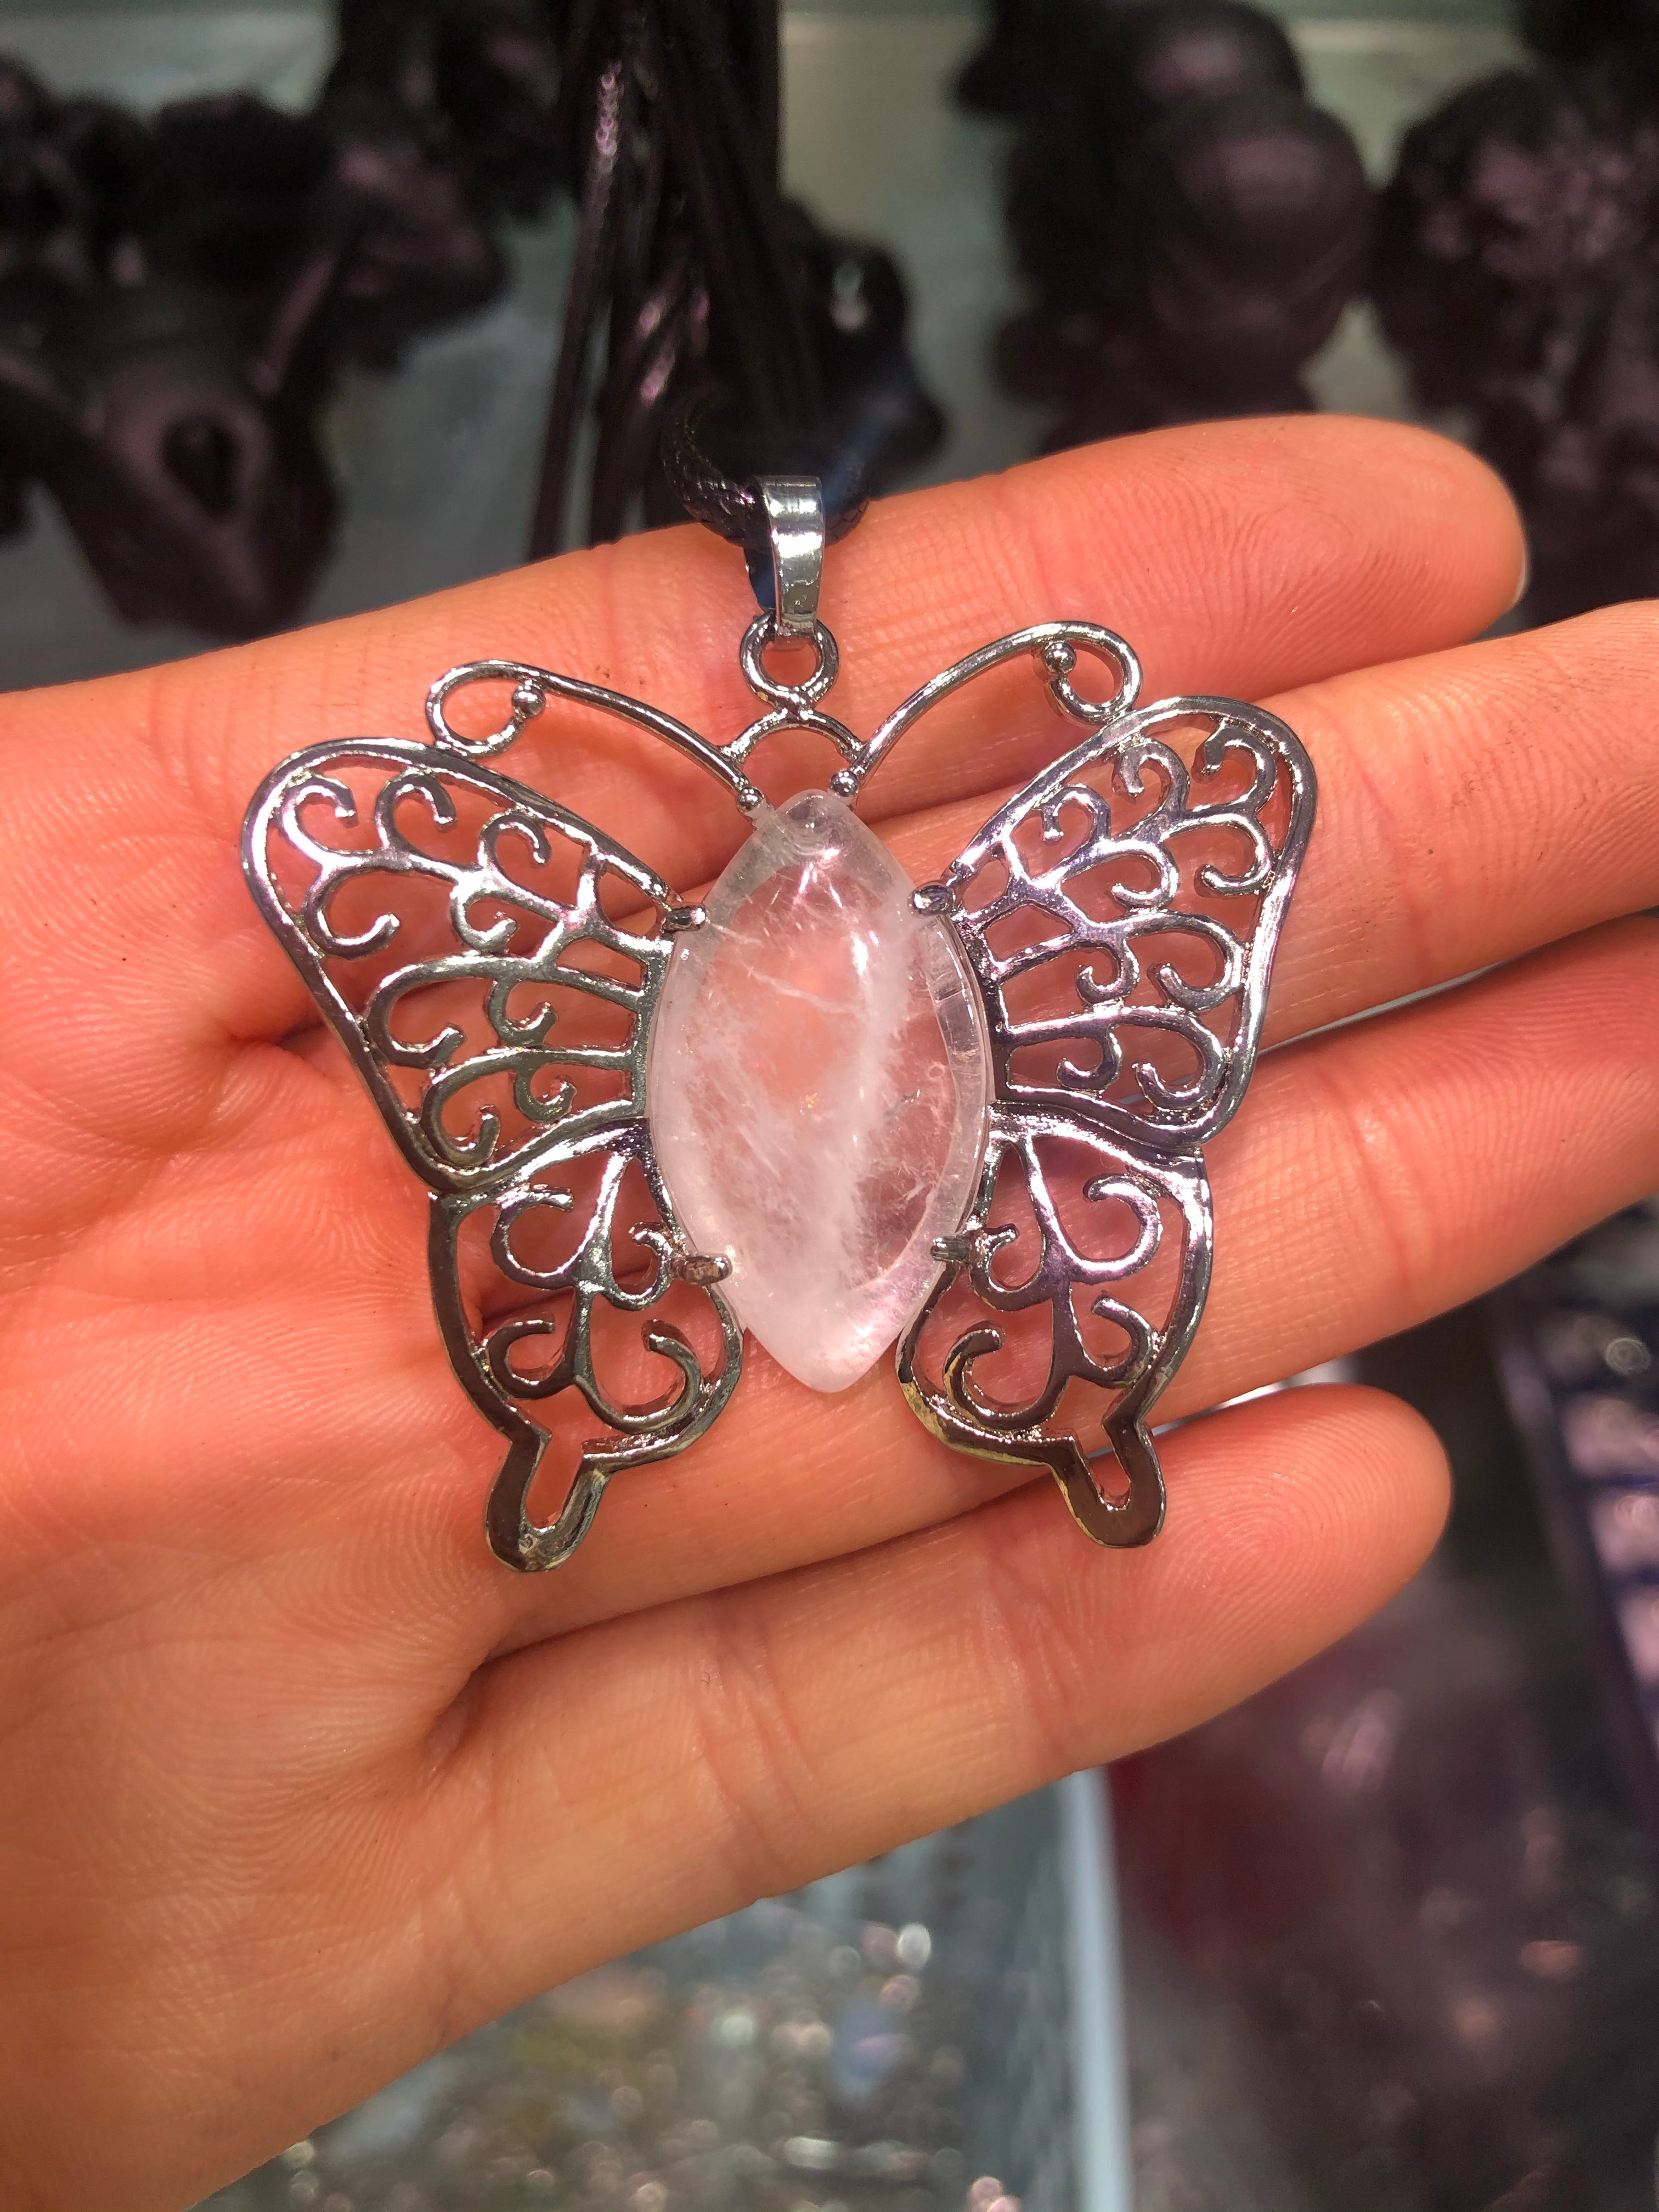 Crystal butterfly pendant/necklace